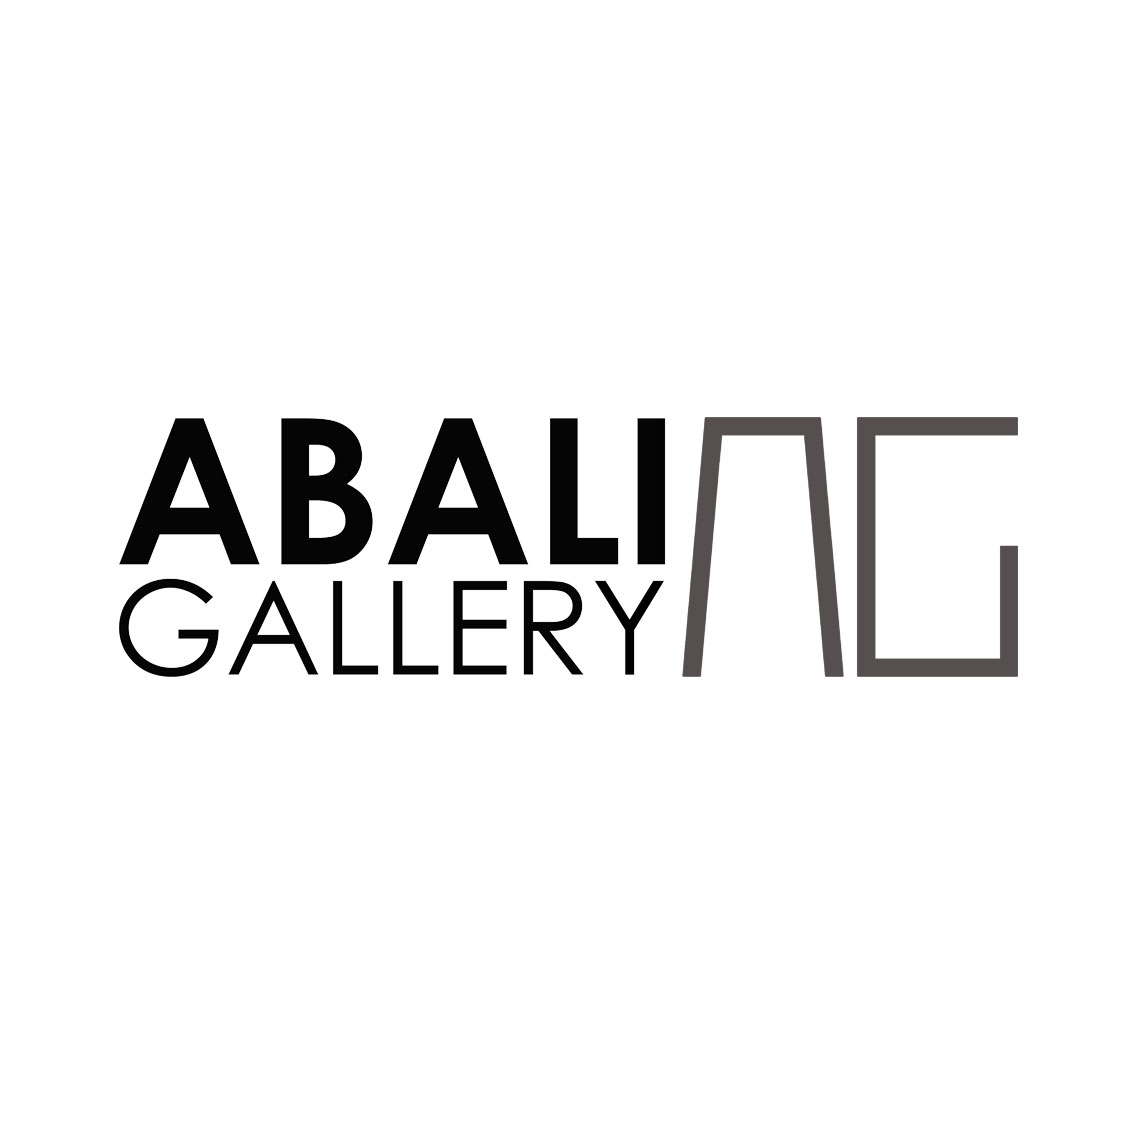 Cover of the artspace Abali Gallery